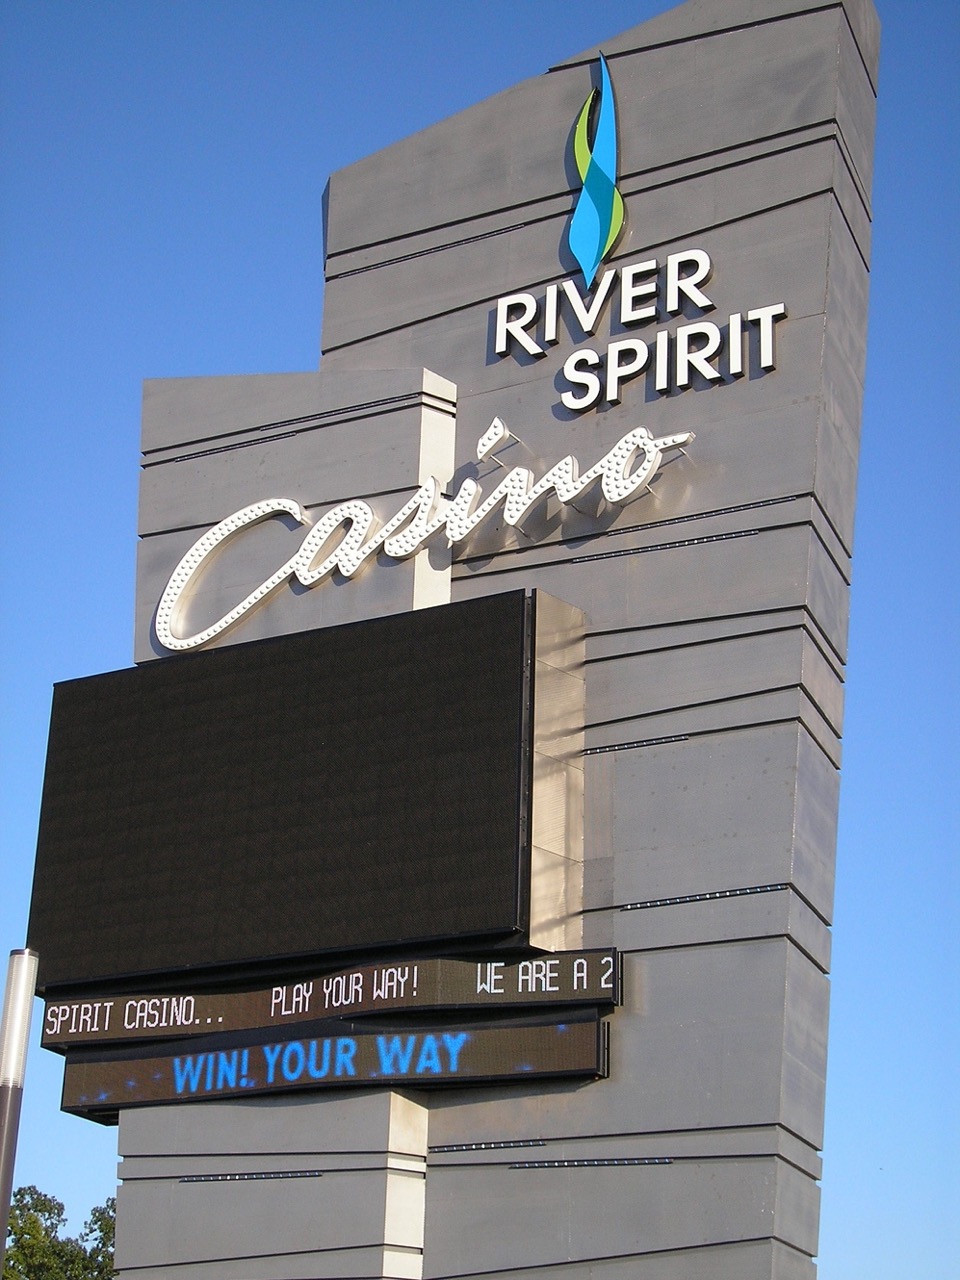 The River Spirit Casino sign. logo, and video board.